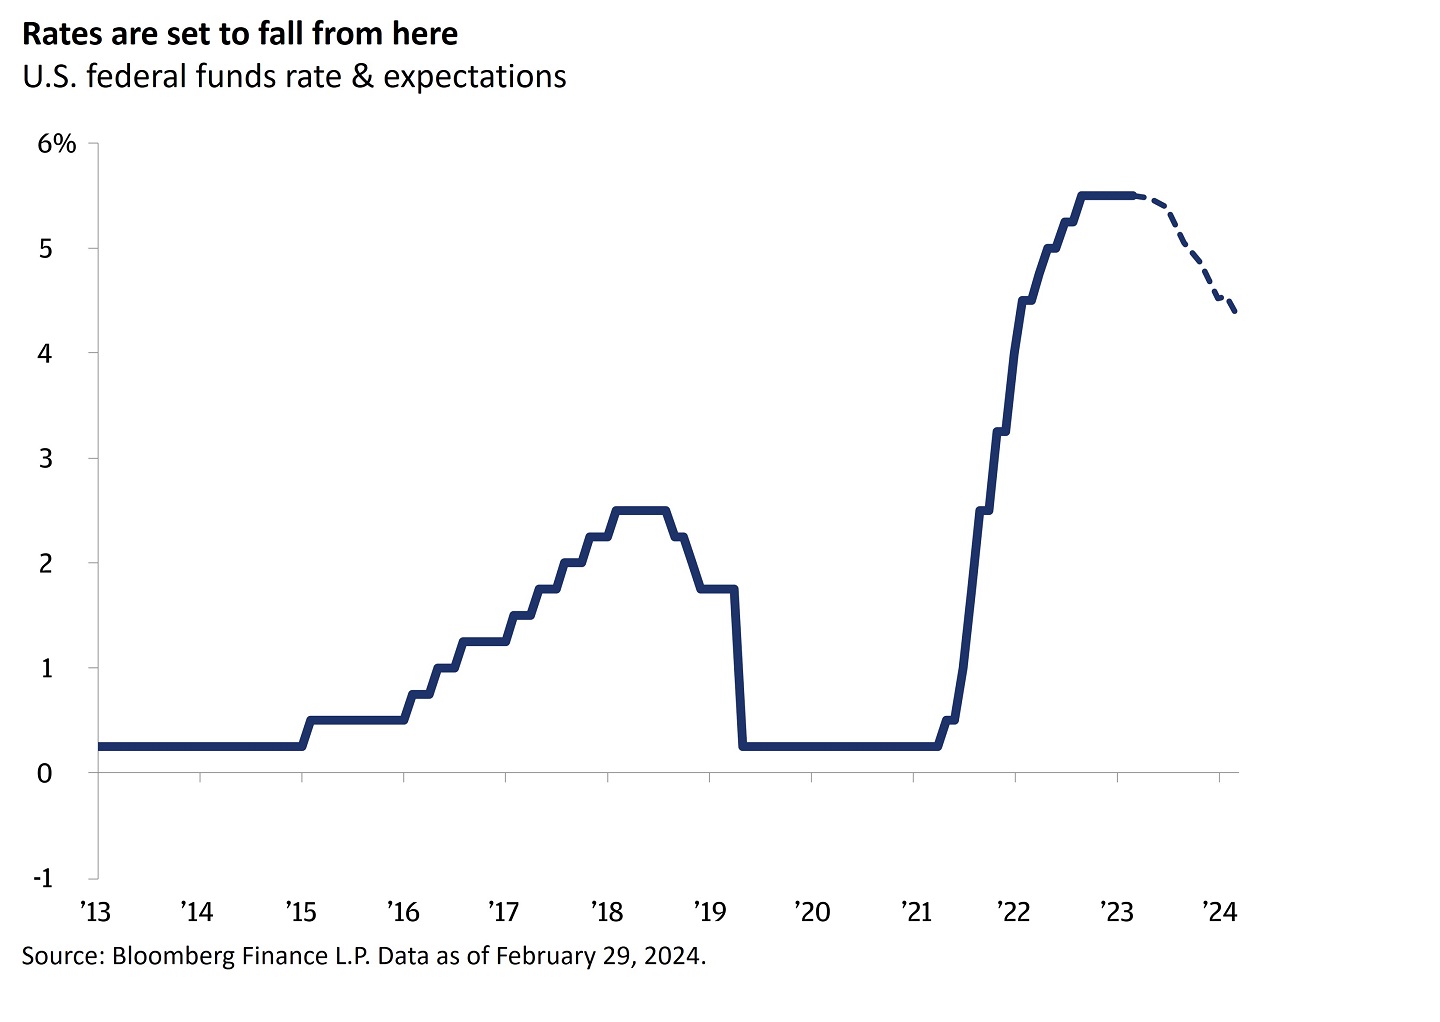 This chart shows U.S. Federal Funds rates and expectations from 2013 to present. In 2013, it was at 0.25%.